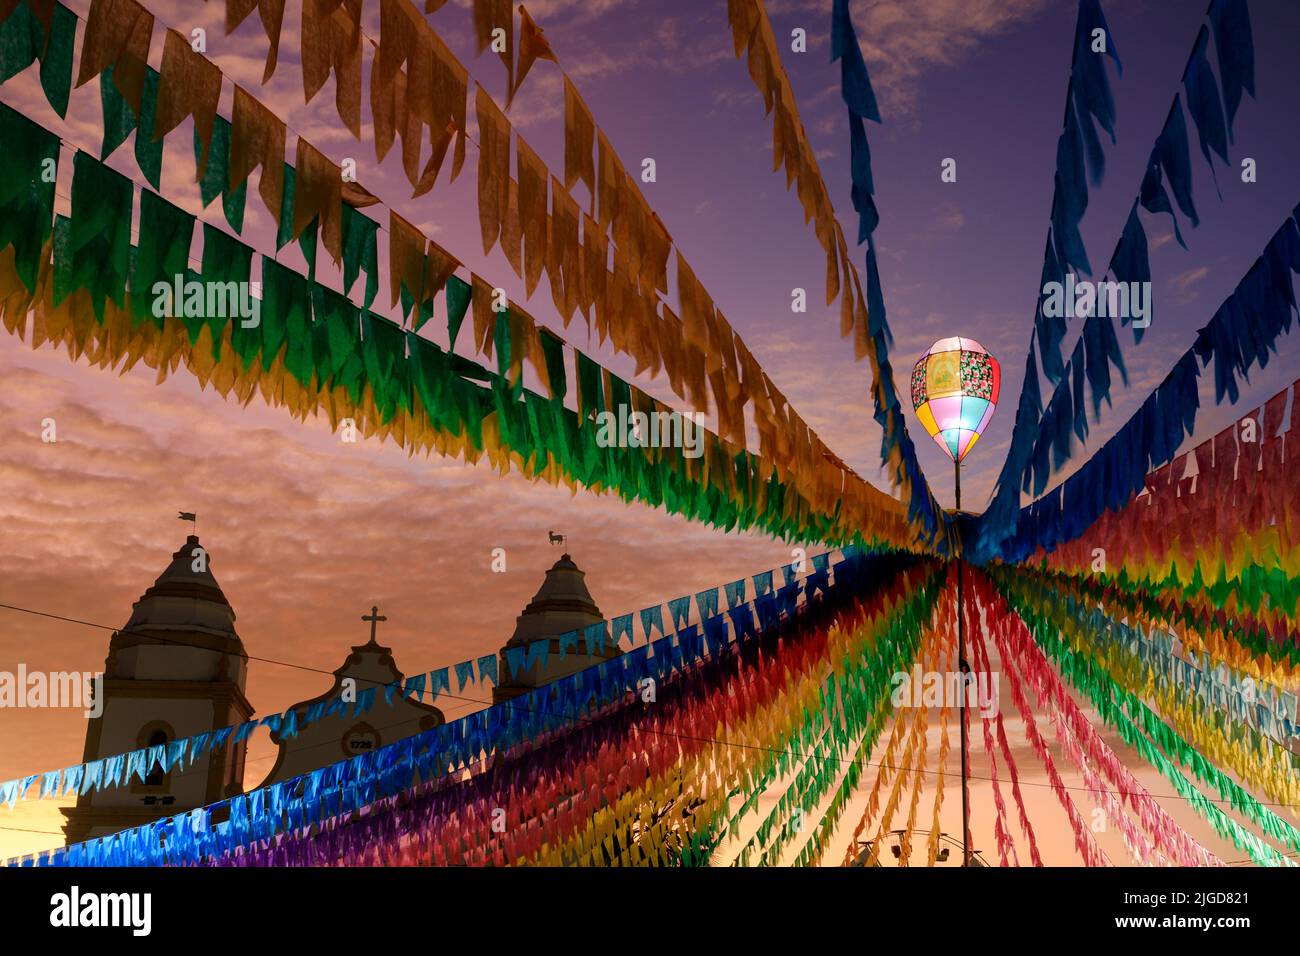 illuminated decorative balloon and colorful flags of the festa junina in Brazil Stock Photo